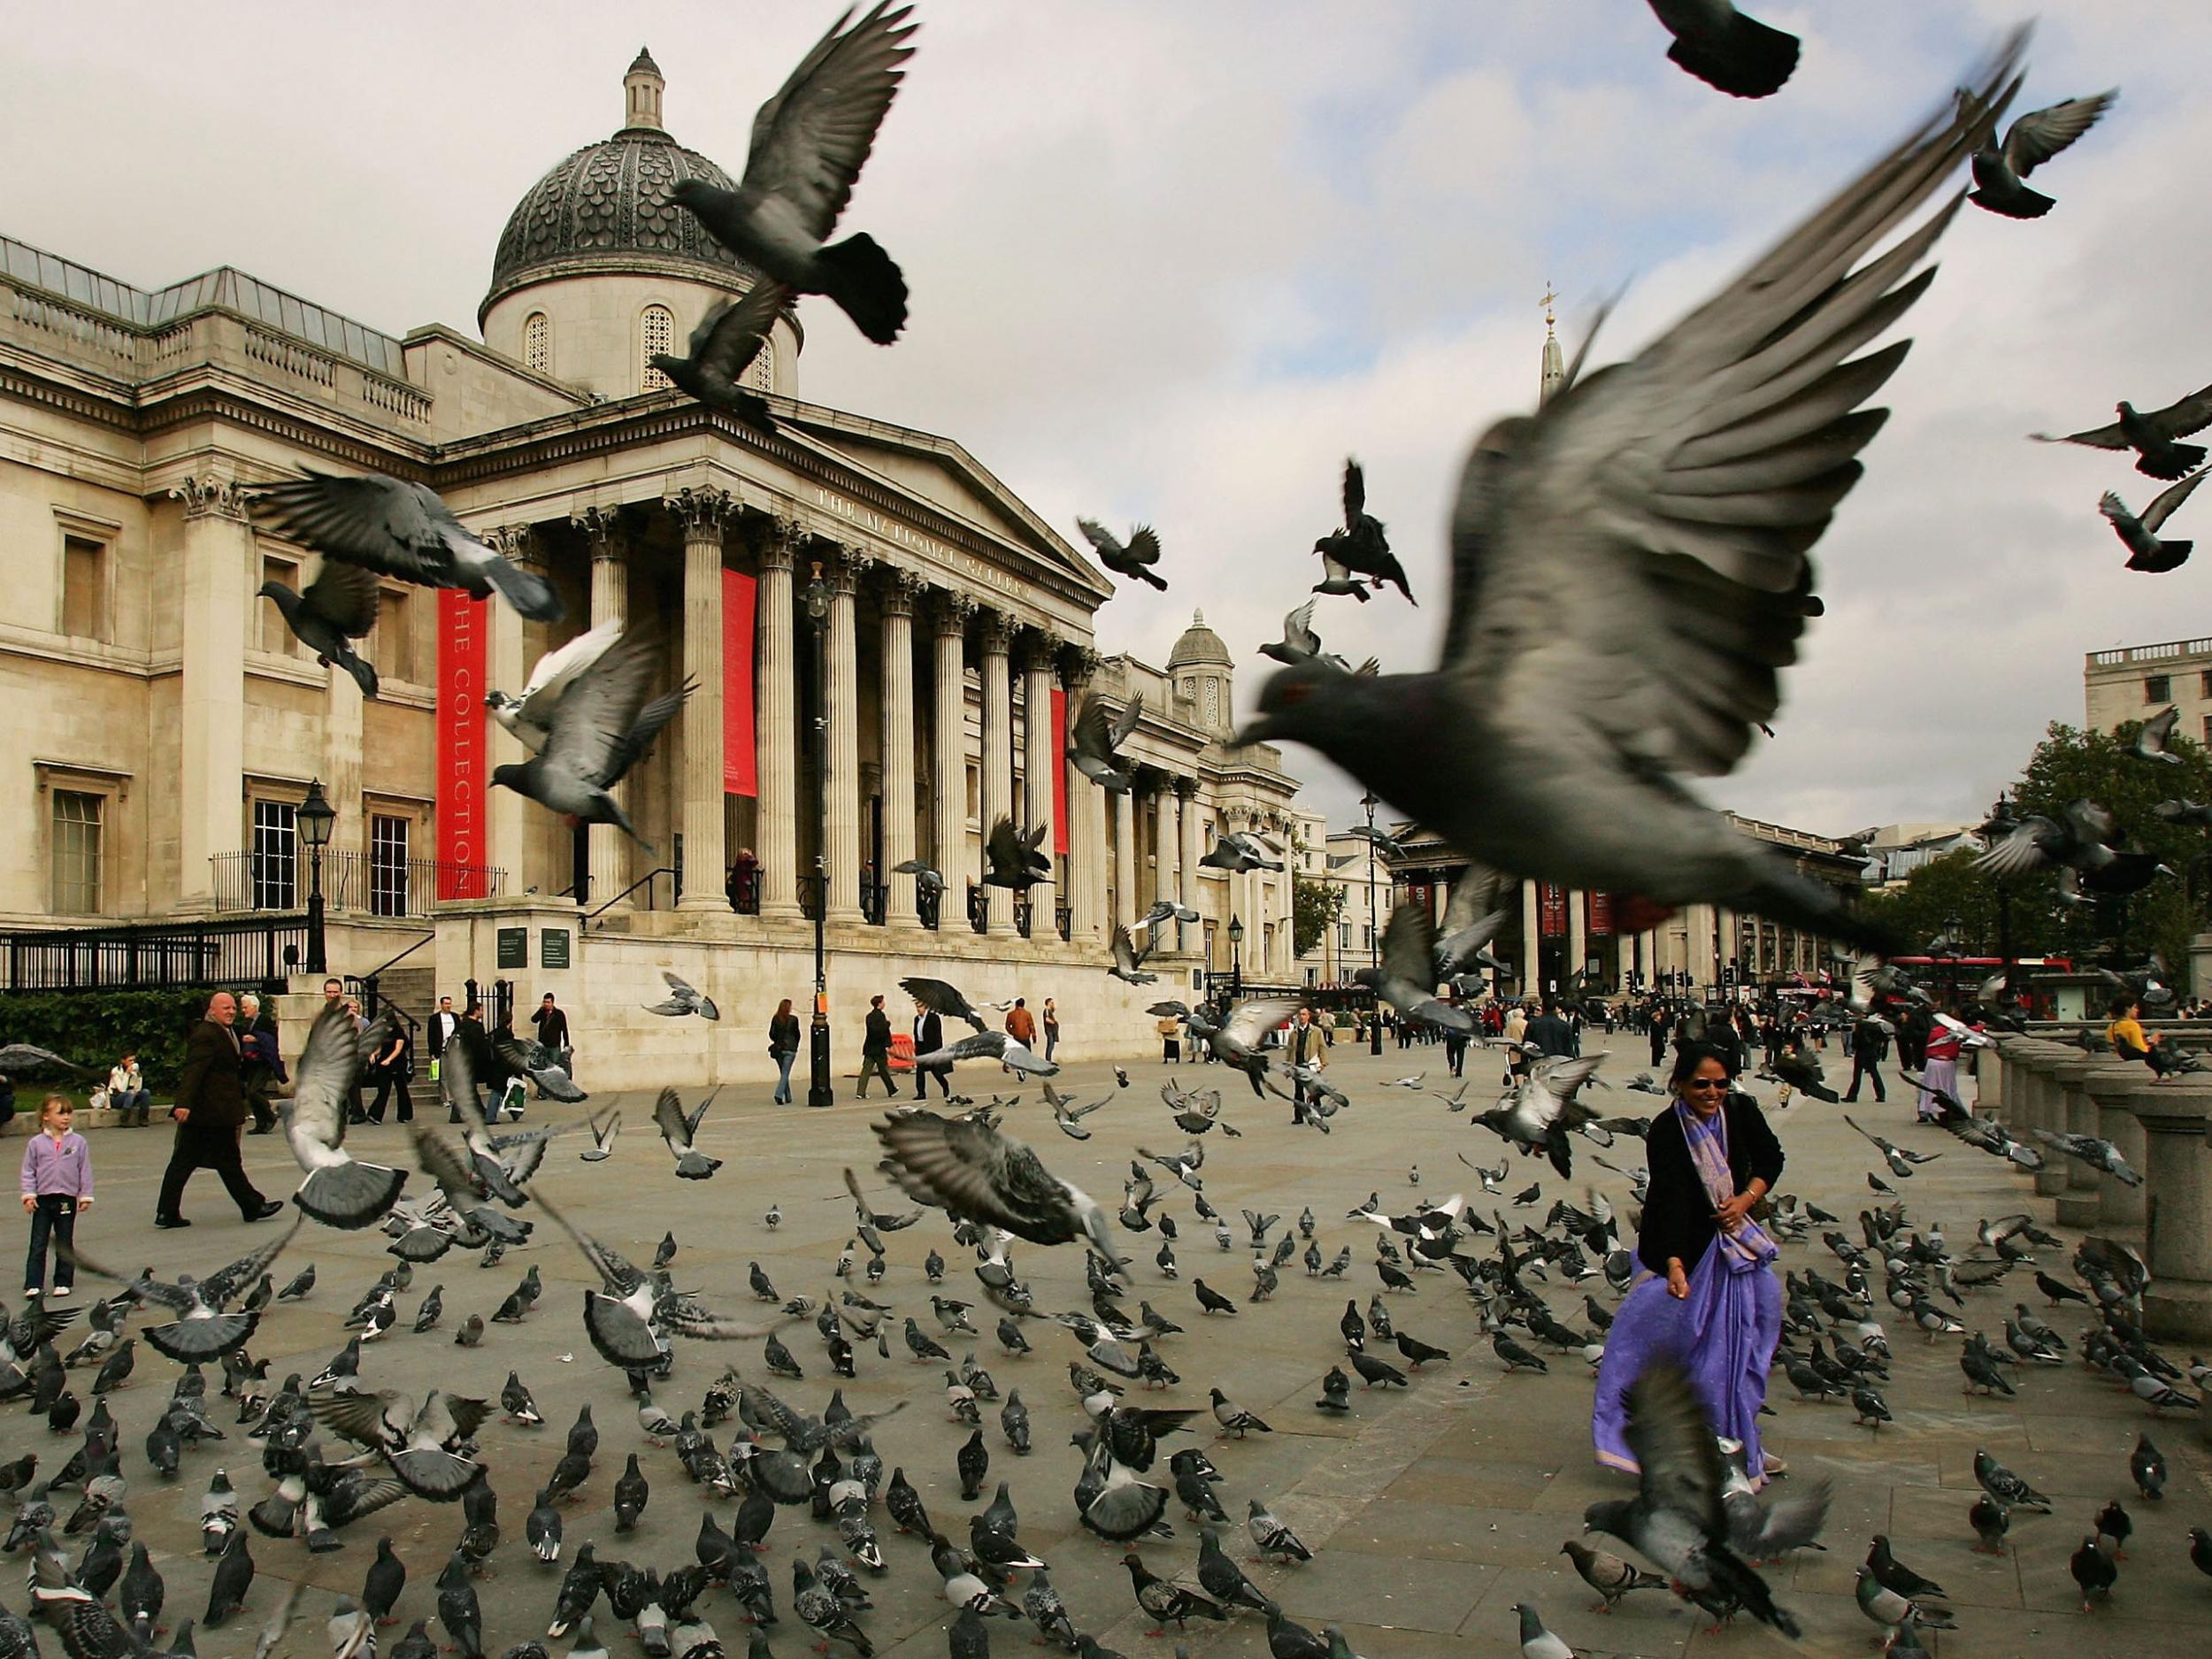 Pigeons flock outside the National Gallery in London's Trafalgar Square